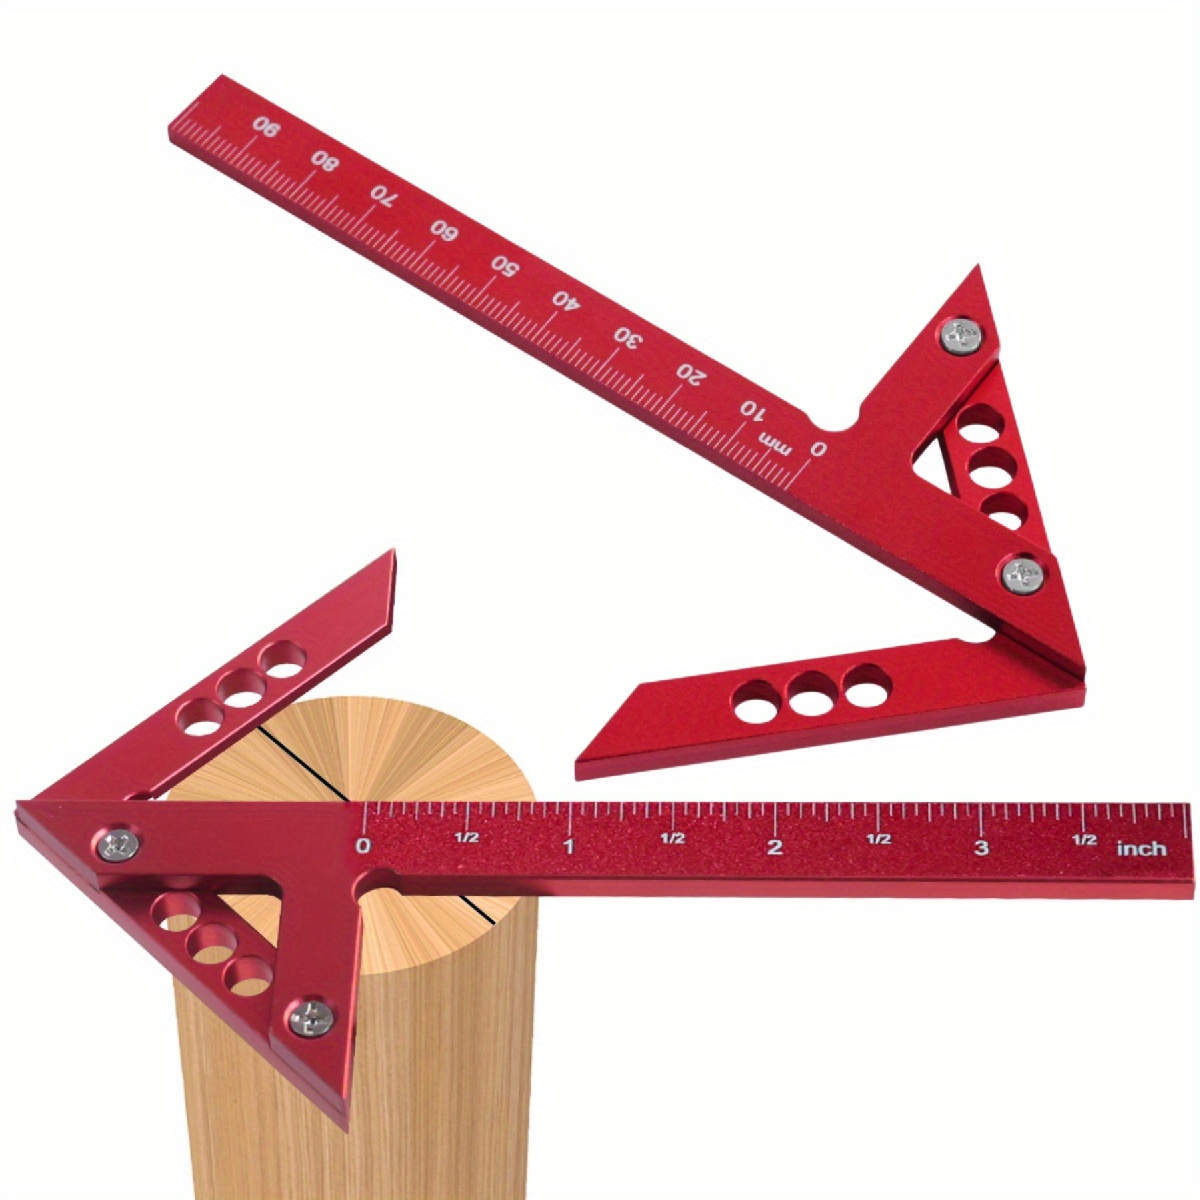 7/12 Inch Aluminum Alloy Carpenters Square Metric Triangle Ruler  Woodworking Metal Square Ruler Angle Marking Carpentry Tool - AliExpress